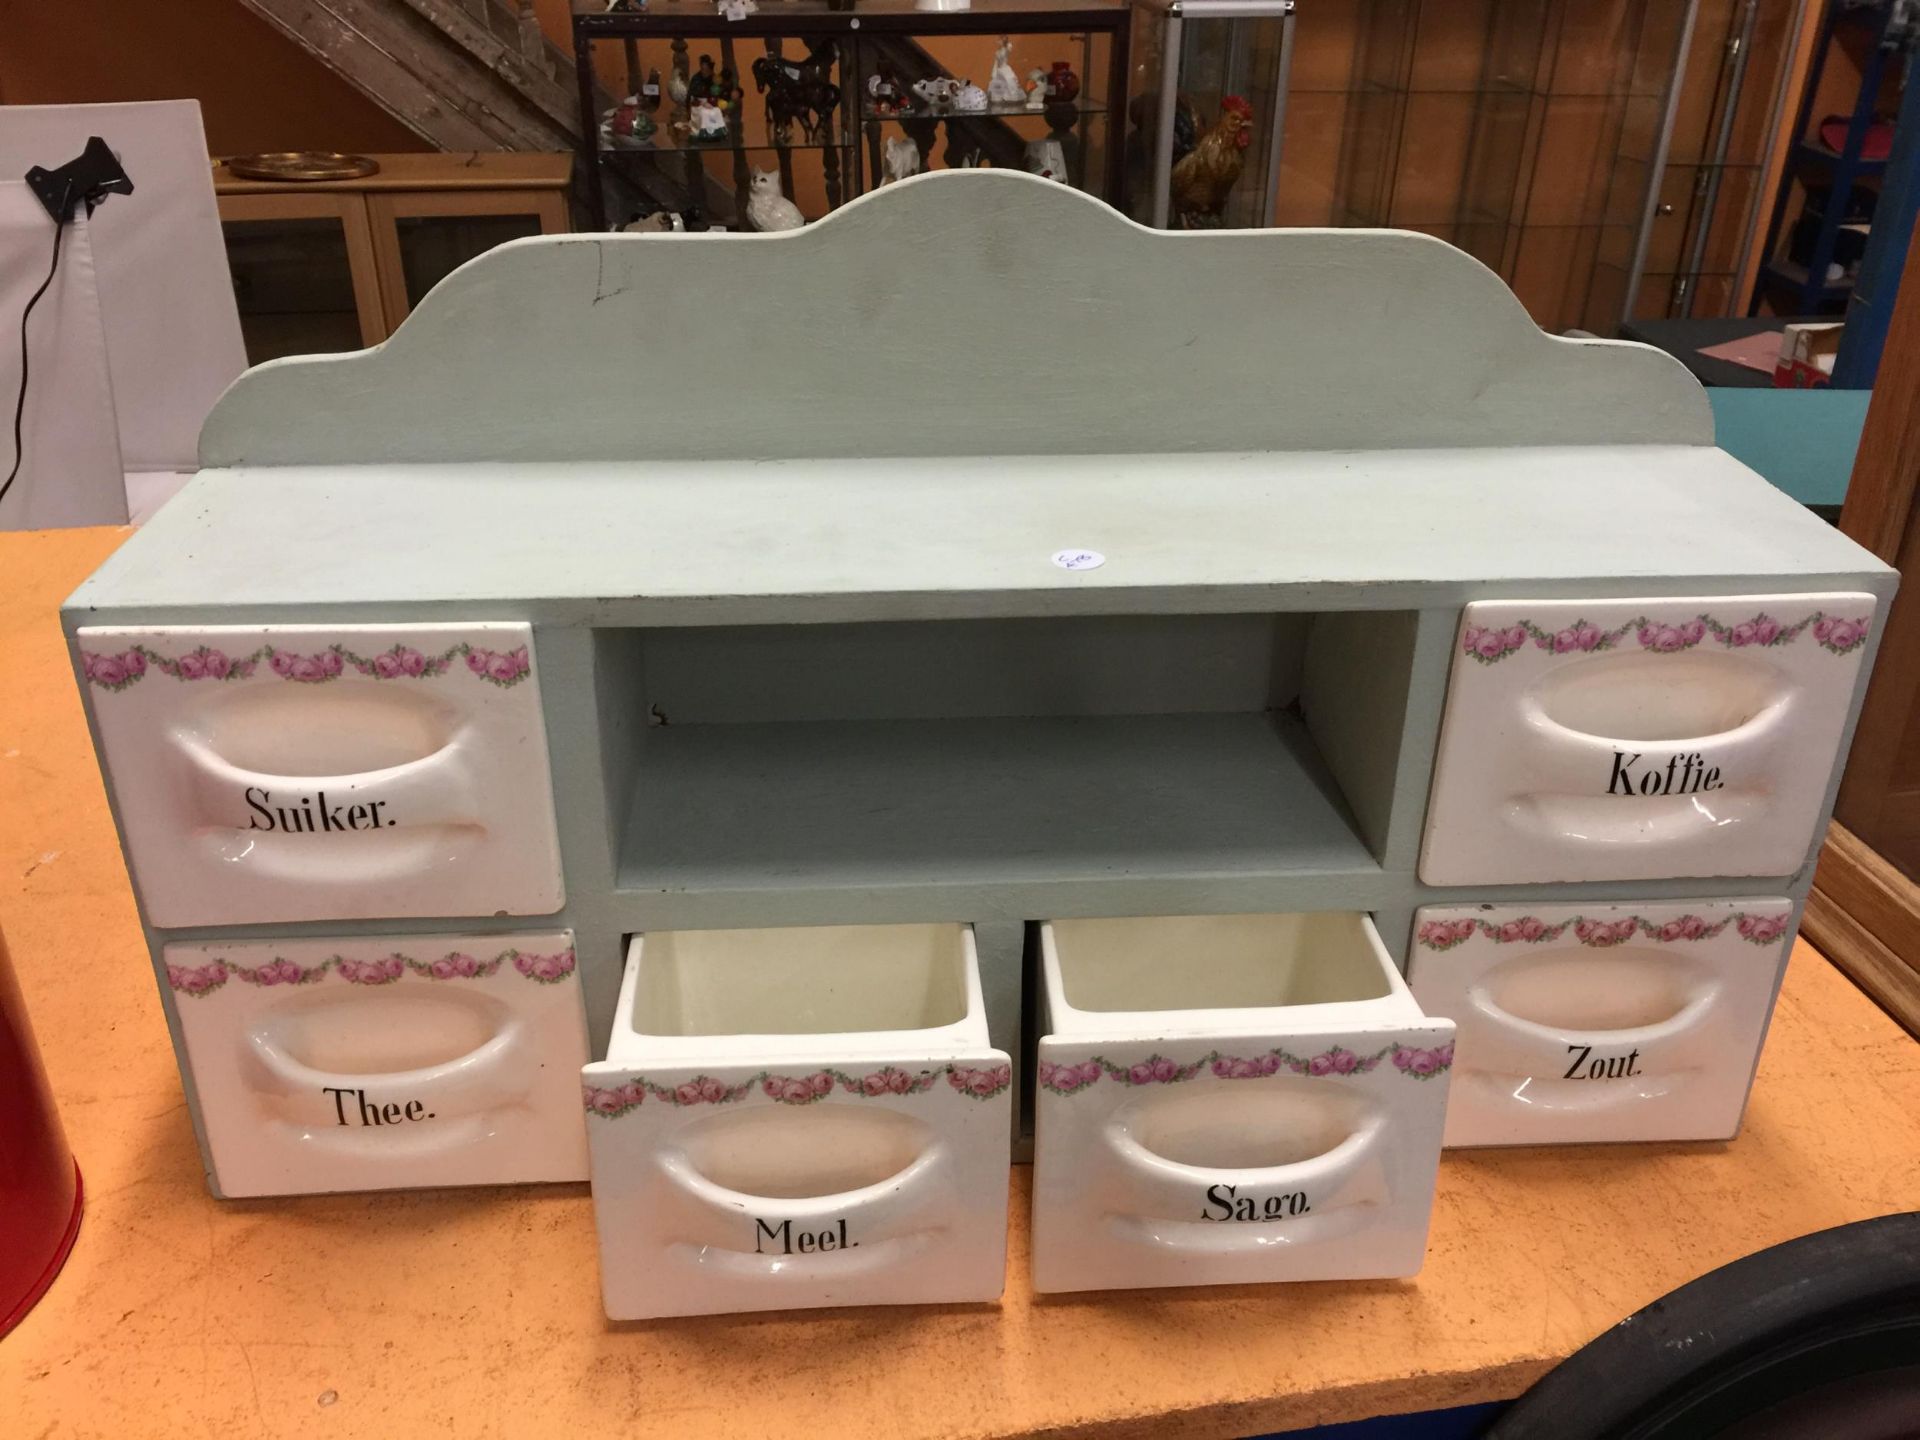 A DUTCH KITCHEN SET OF SIX PORCELAIN CONDIMENT DRAWERS IN WOODEN FRAME